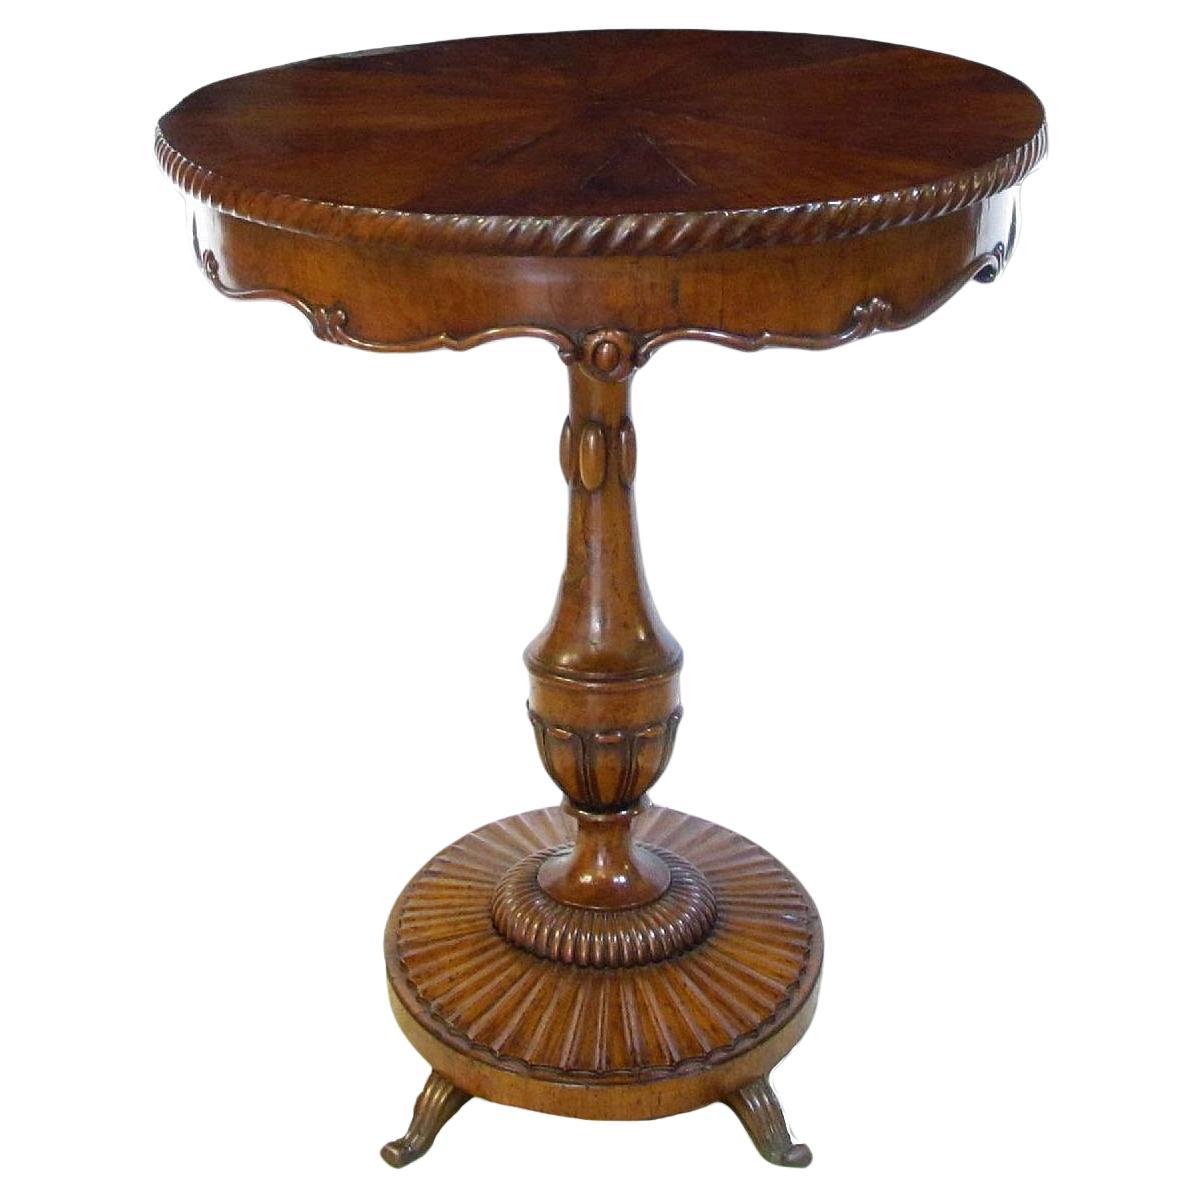 EARLY 19th CENTURY OVAL COFFEE TABLE